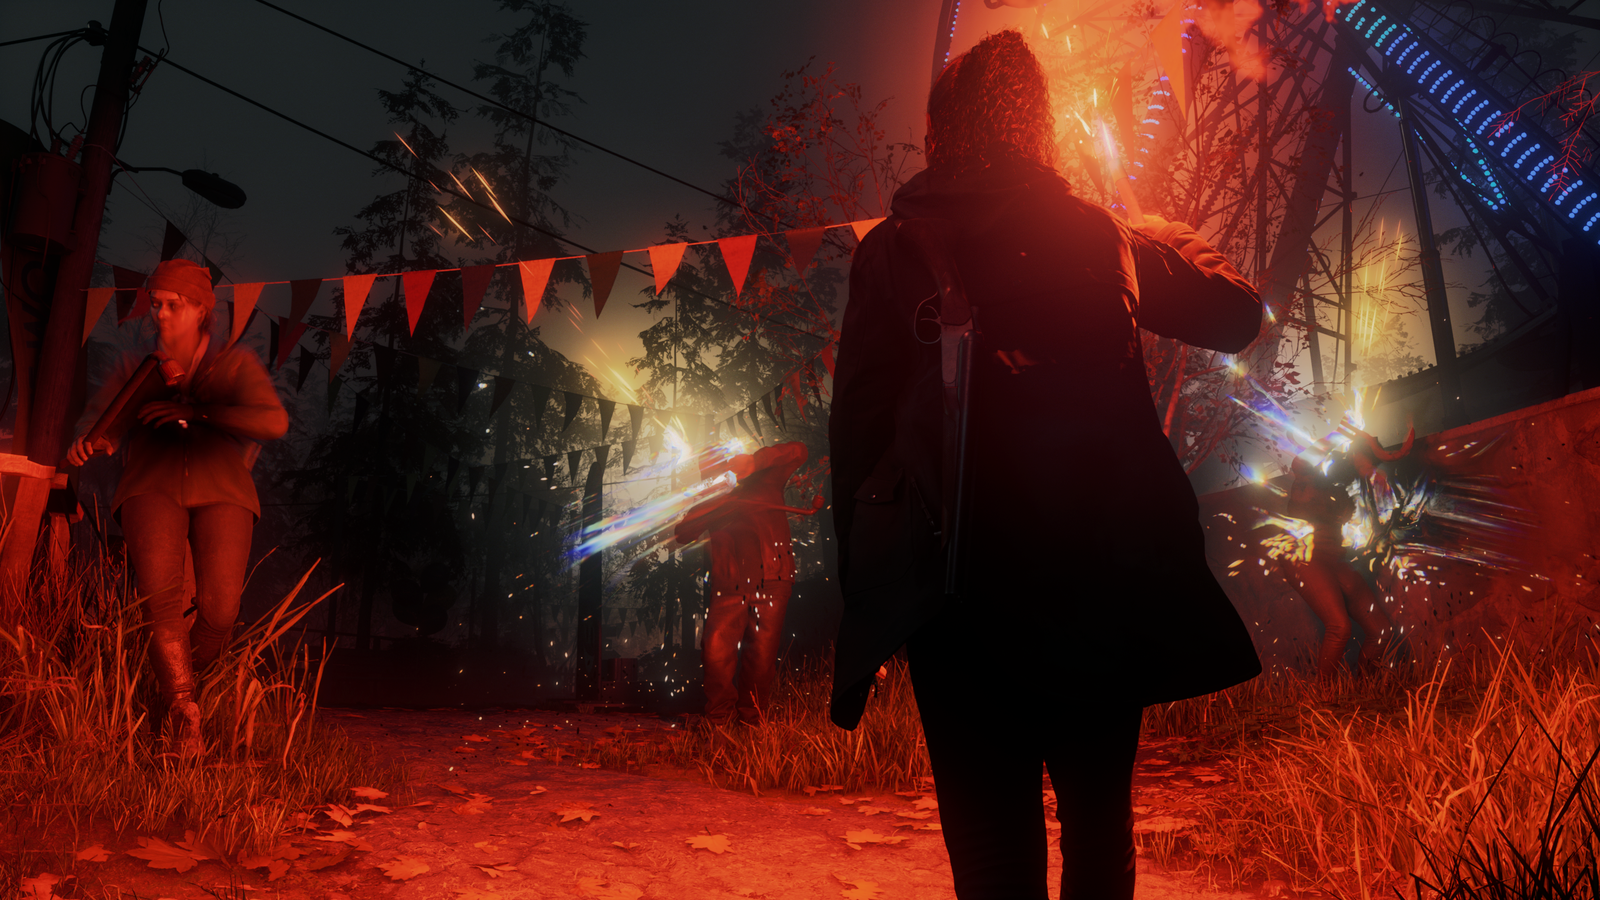 Alan Wake 2 gets October release date on PS5, Xbox Series X/S, and